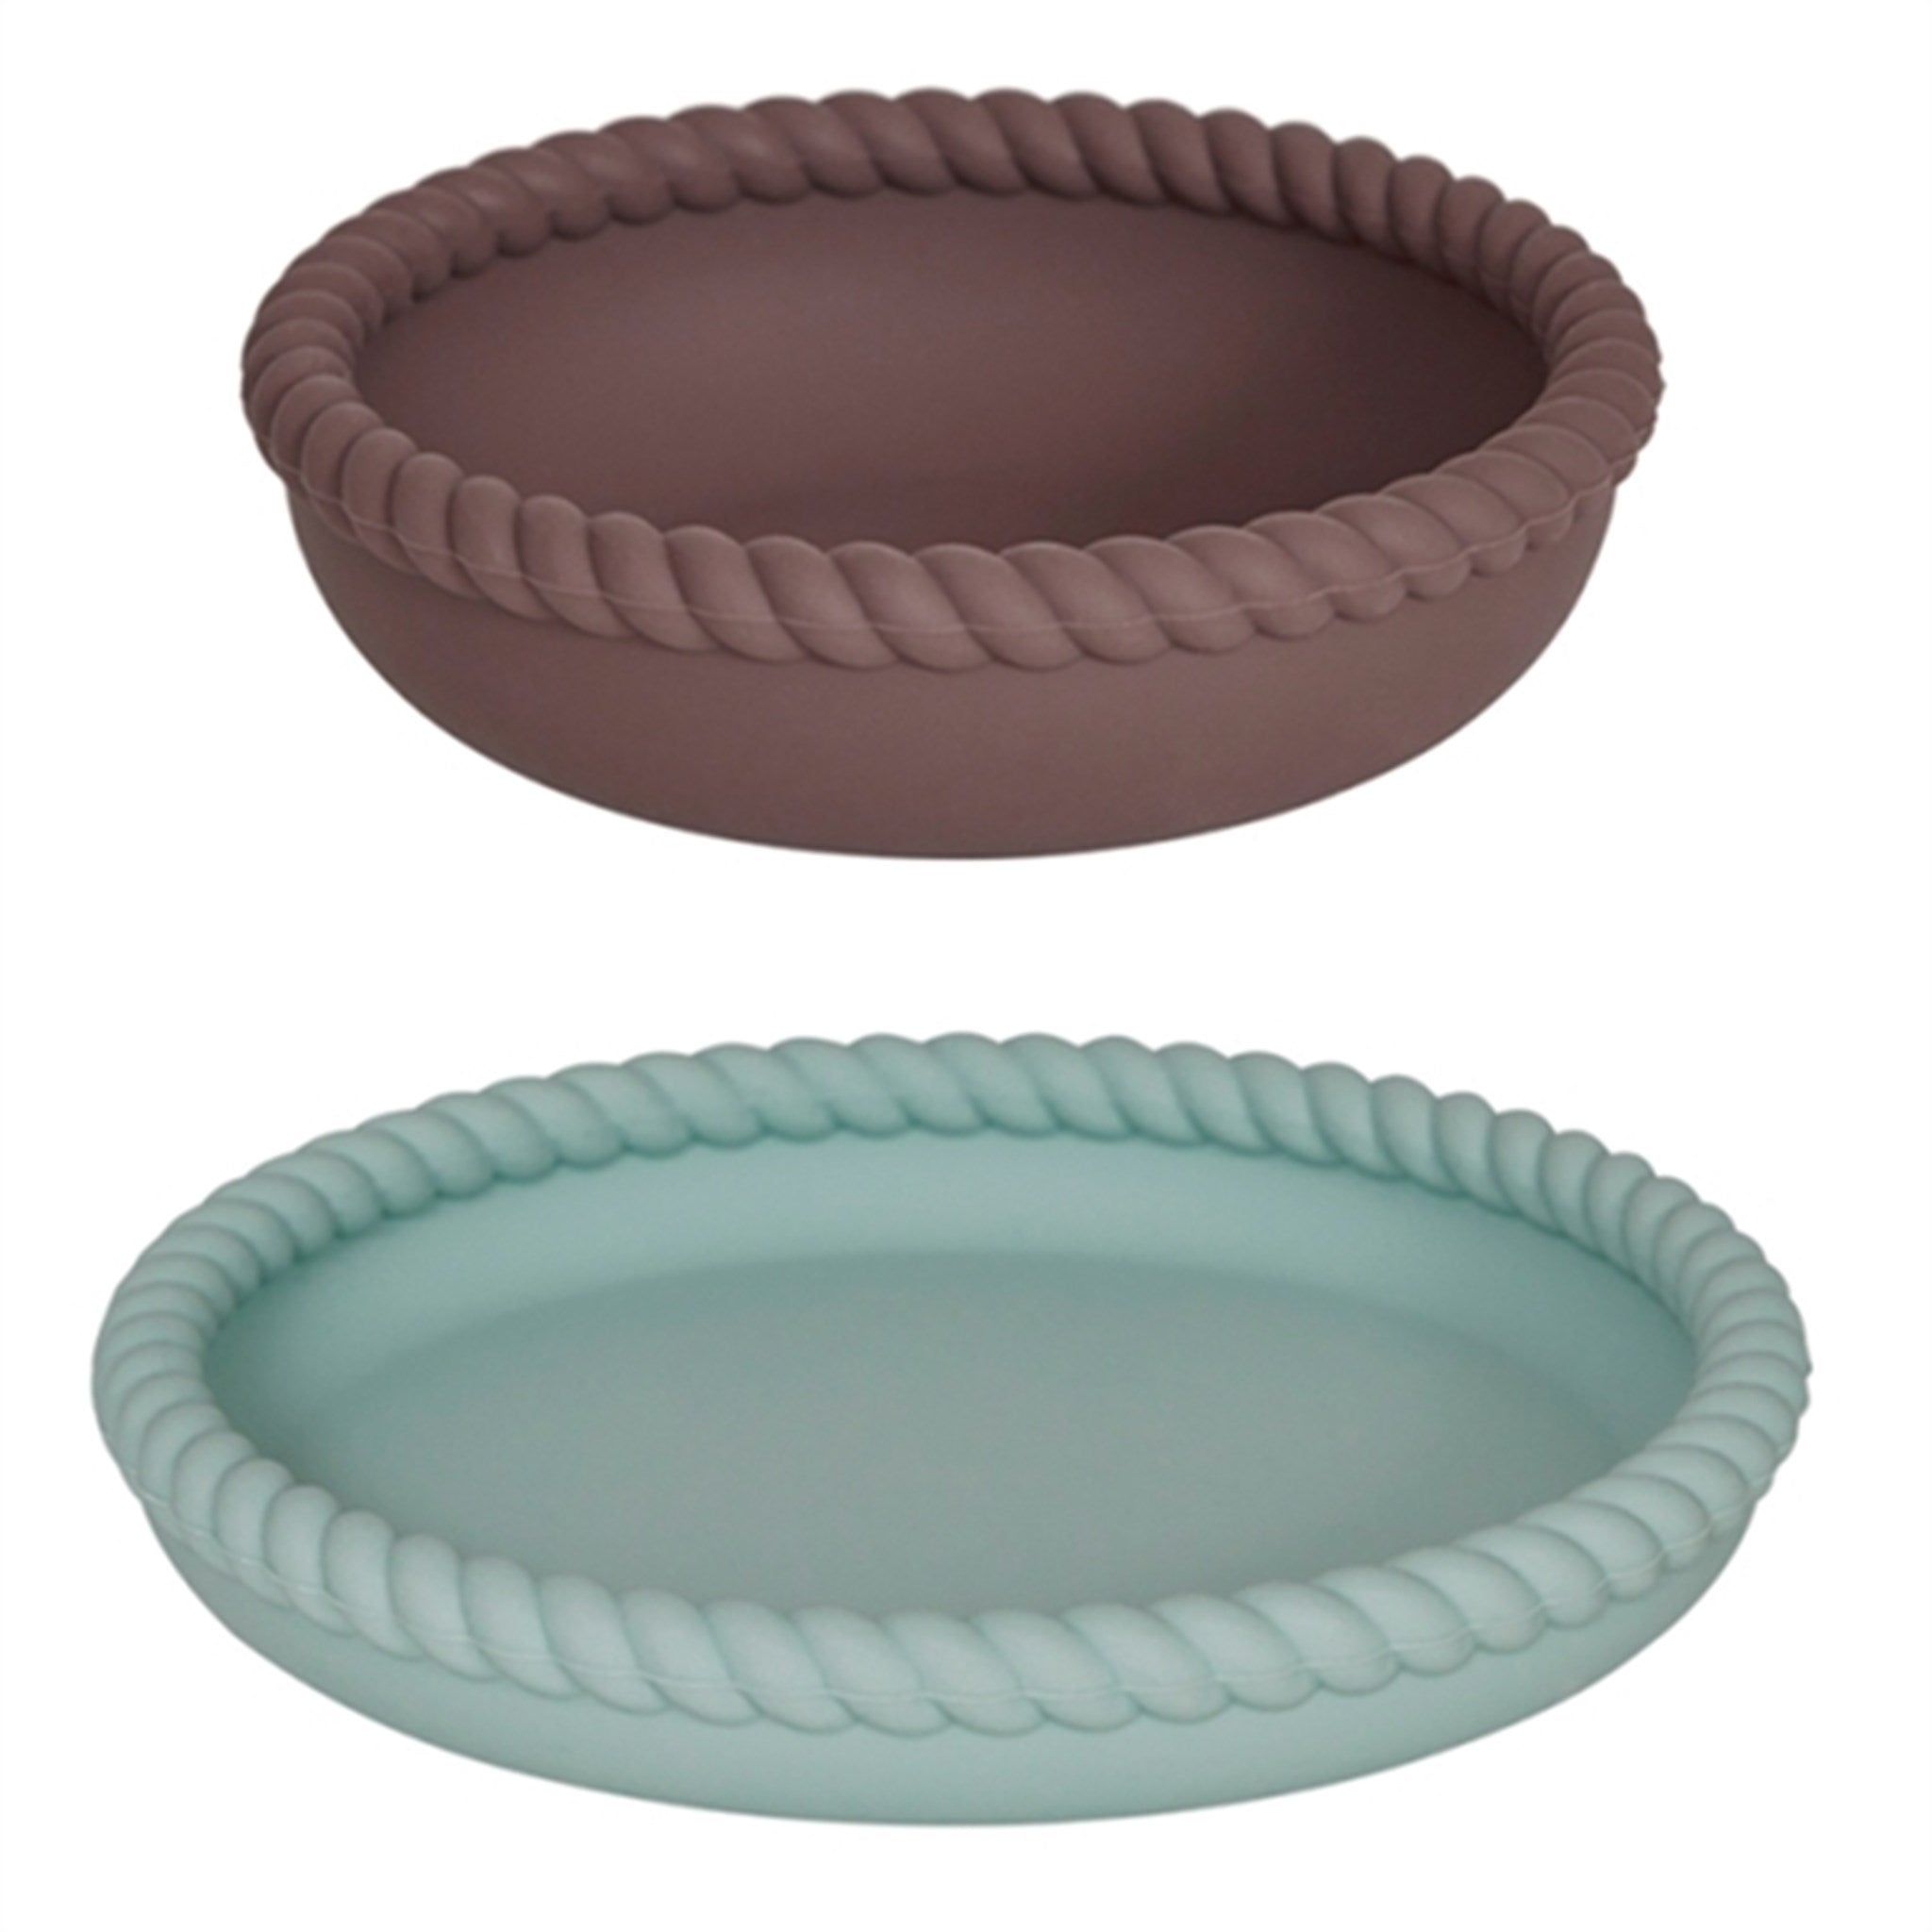 OYOY Mellow Bowl and Plate Pale Mint/Choko